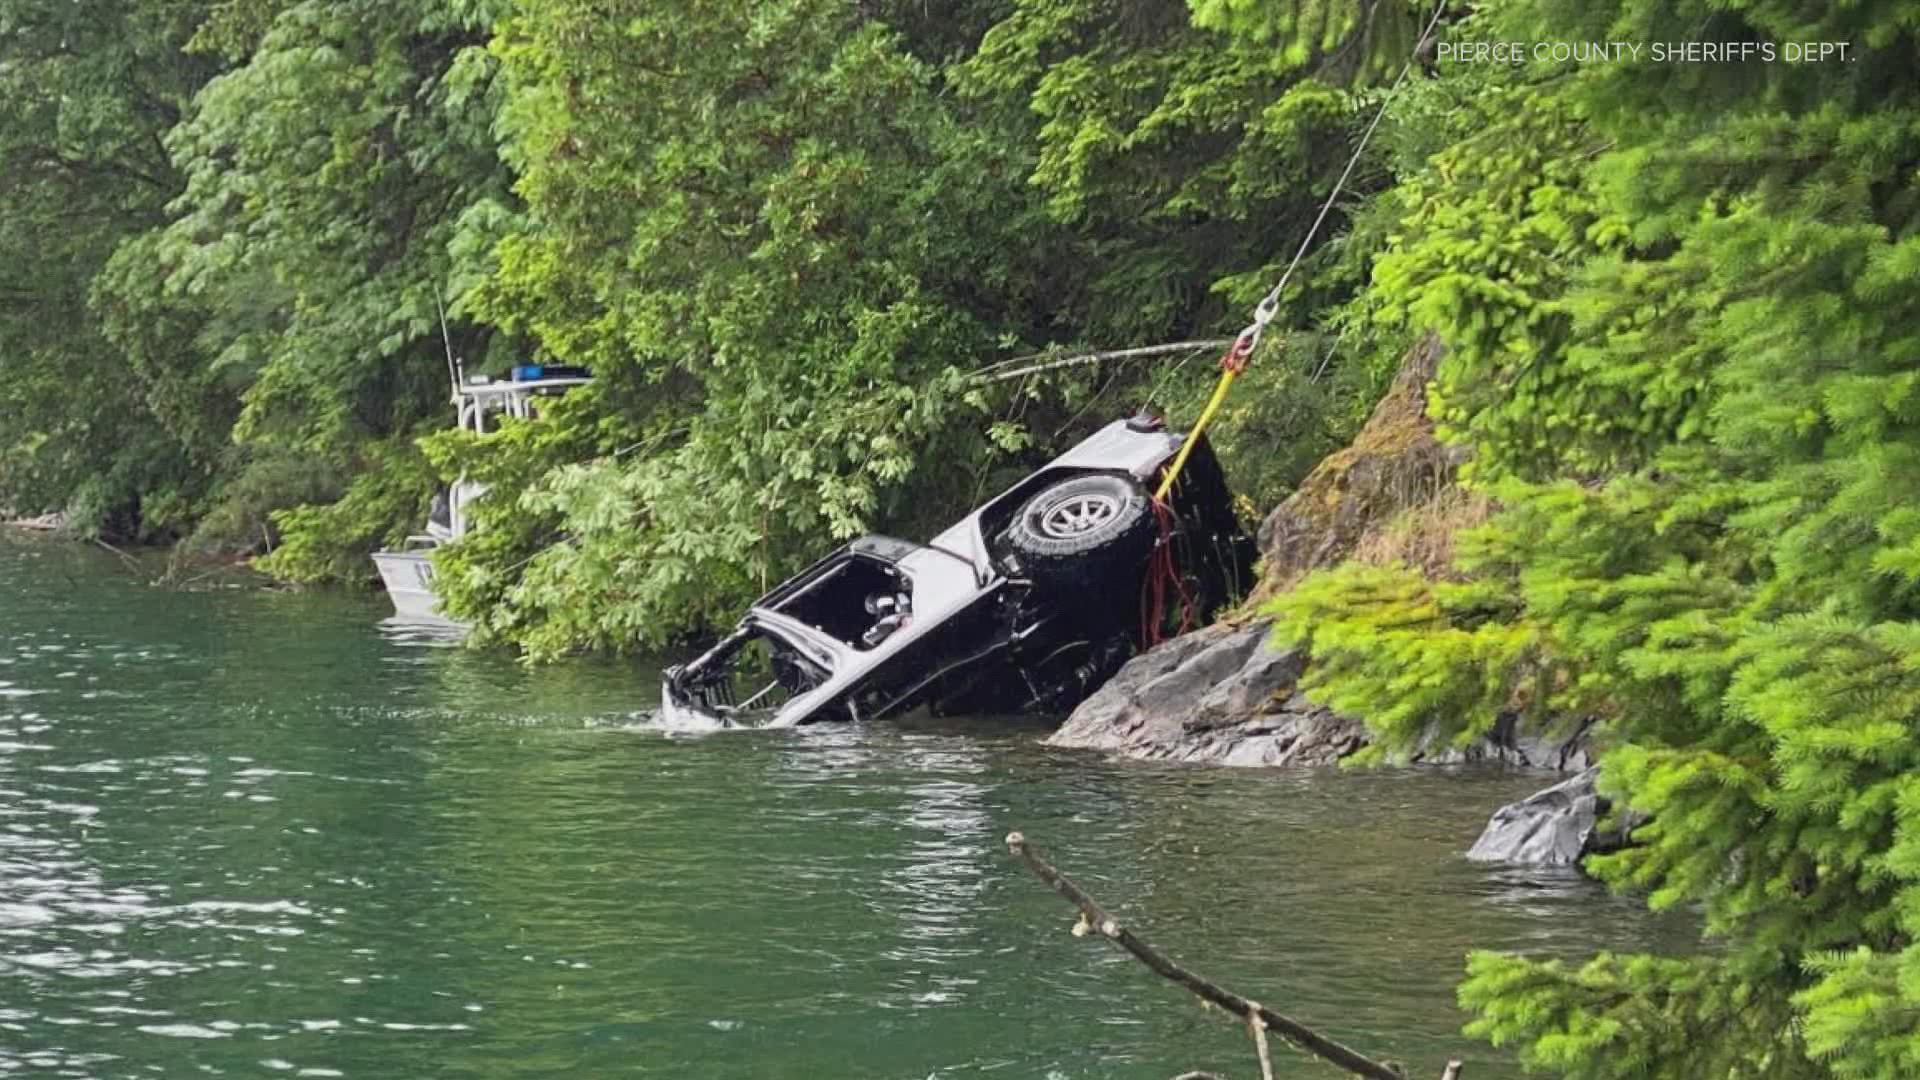 A young child was killed on the afternoon of June 27 after a car went over the embankment, submerging into the water of Lake Cushman.